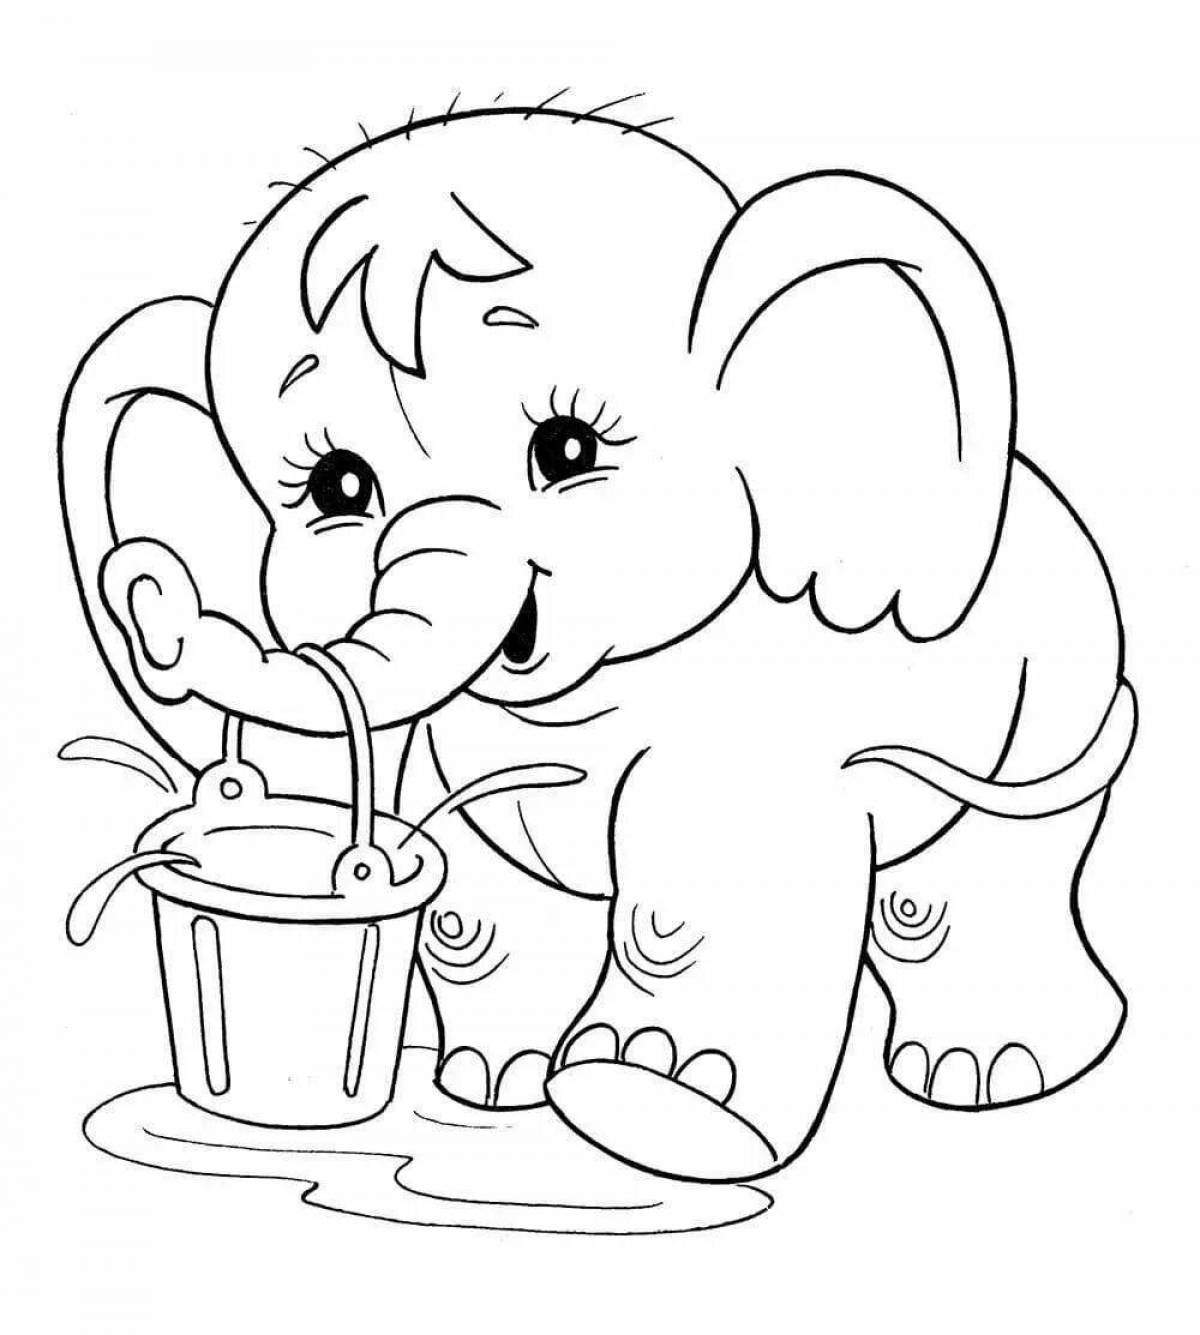 Crazy coloring pages for kids